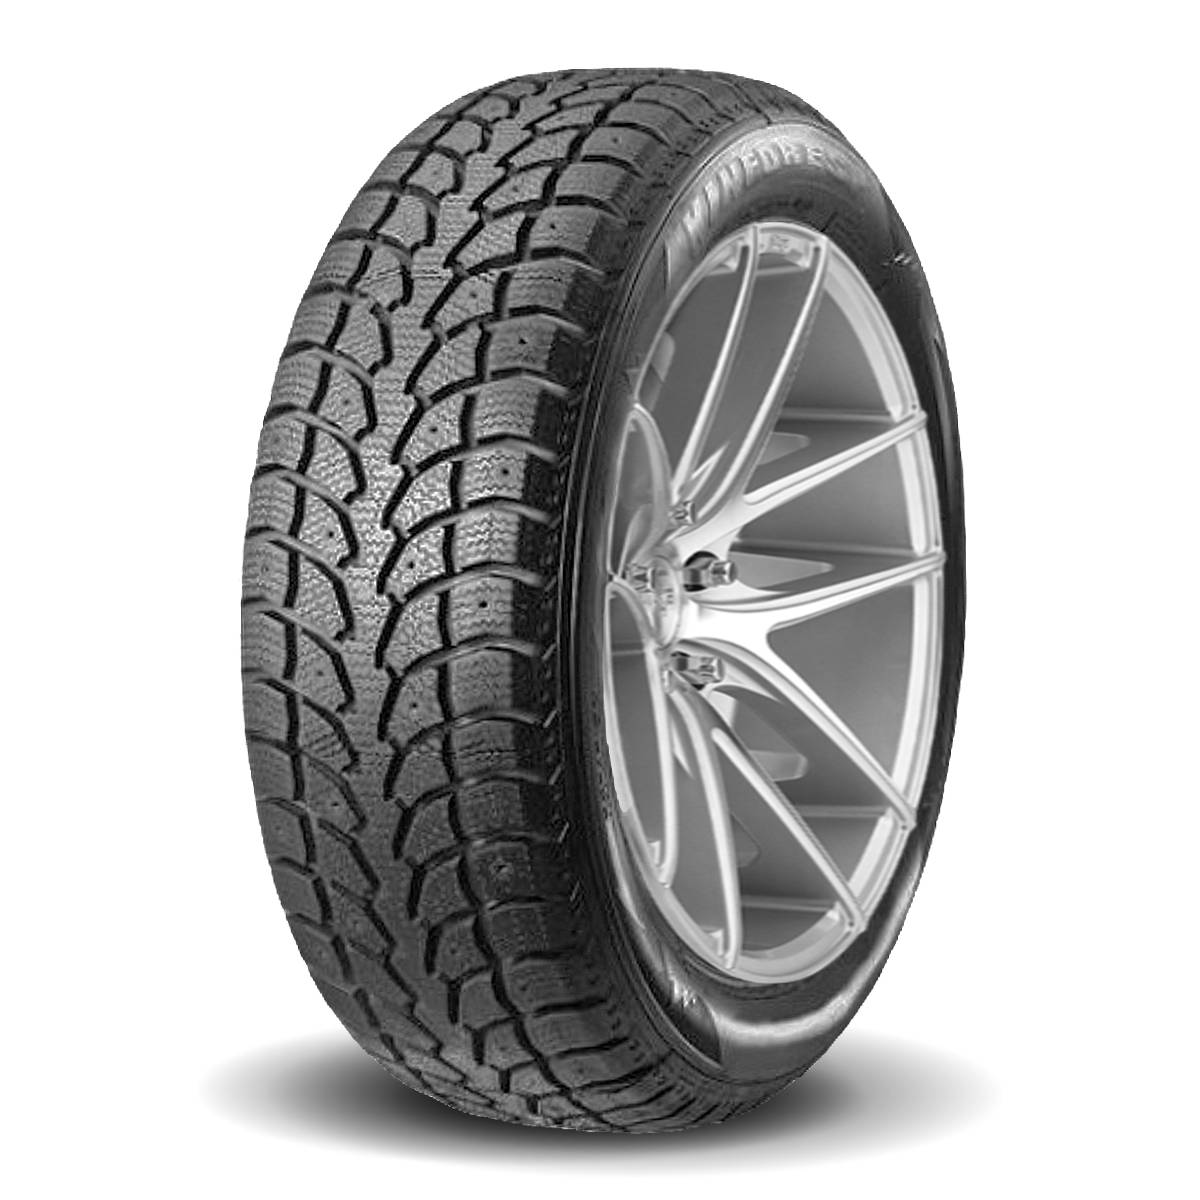 KFT SNOW FORCE TIRES